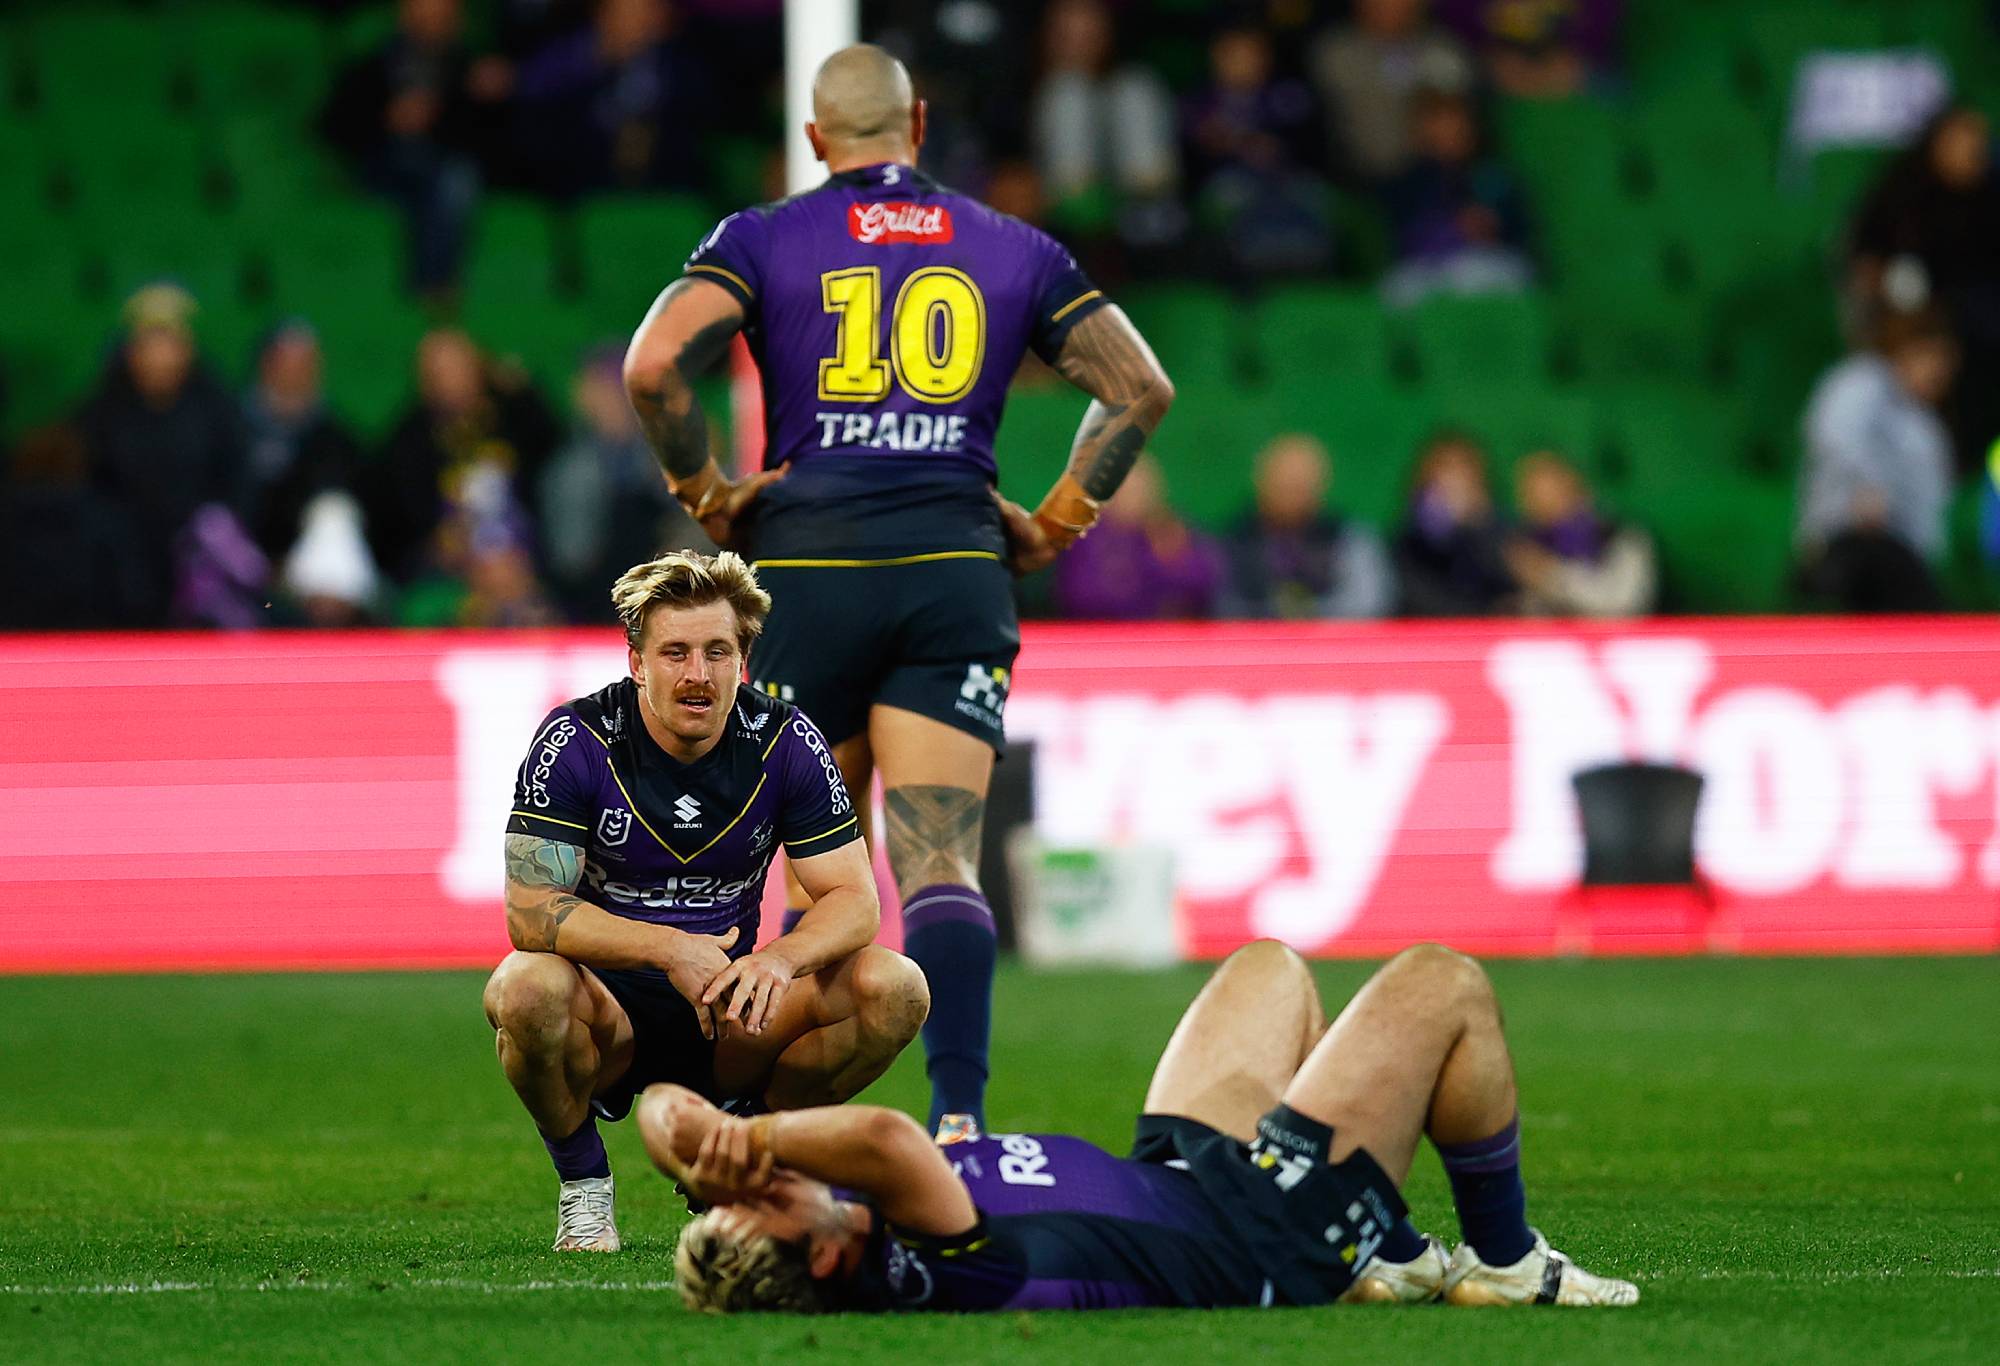 MELBOURNE, AUSTRALIA - SEPTEMBER 10: Cameron Munster (L), Brandon Smith and Nelson Asofa-Solomona of the Storm looks dejected after the NRL Elimination Final match between the Melbourne Storm and the Canberra Raiders at AAMI Park on September 10, 2022 in Melbourne, Australia. (Photo by Daniel Pockett/Getty Images)